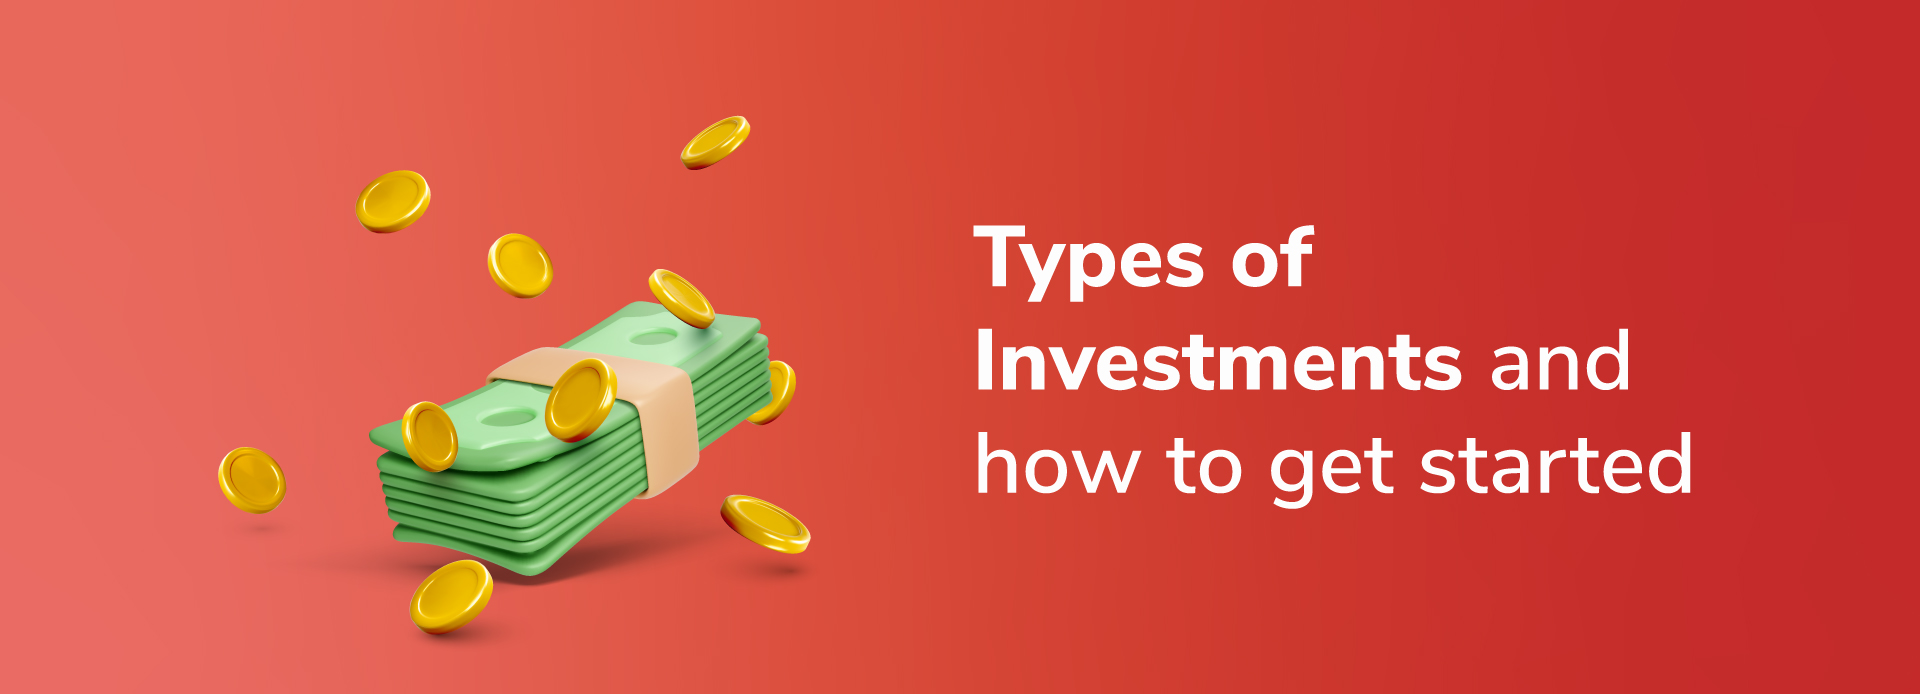 Types of Investments and How You Can Get Started